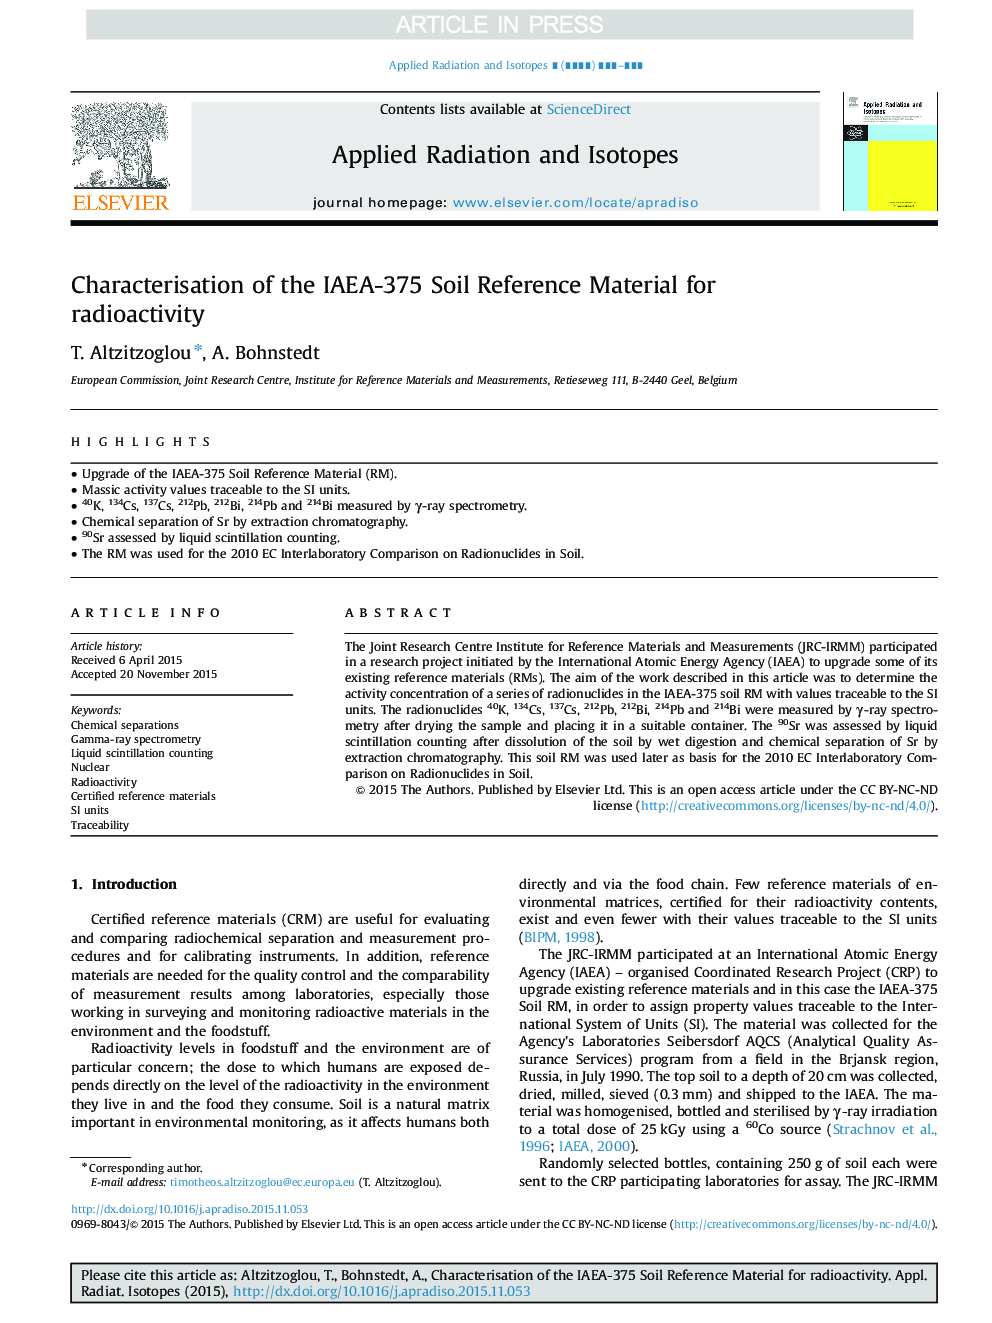 Characterisation of the IAEA-375 Soil Reference Material for radioactivity